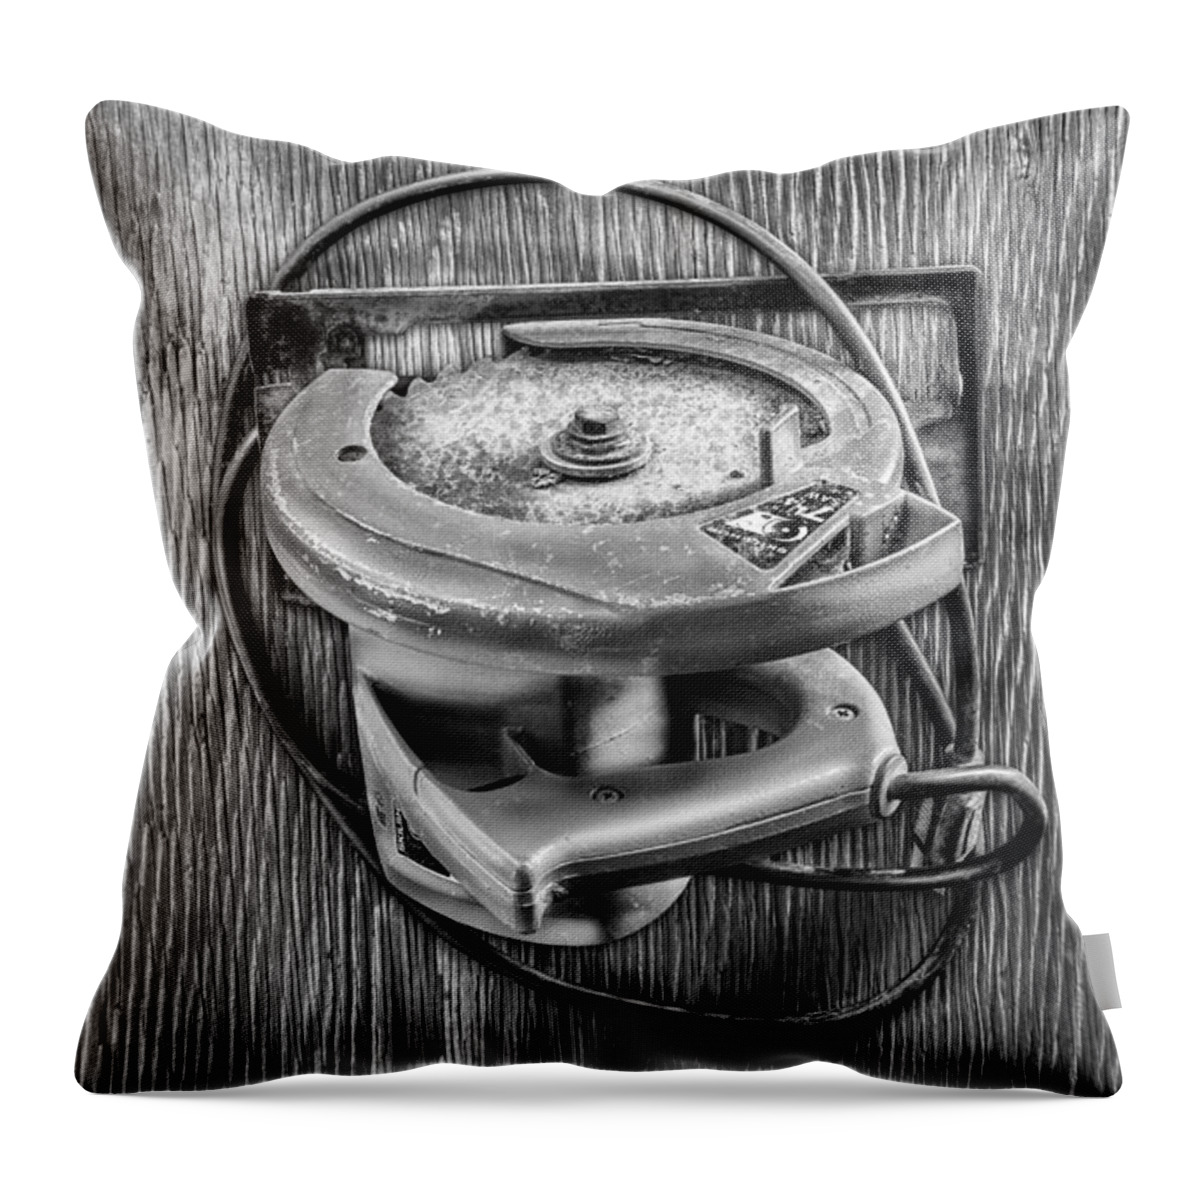 Antique Throw Pillow featuring the photograph Skilsaw Side by YoPedro